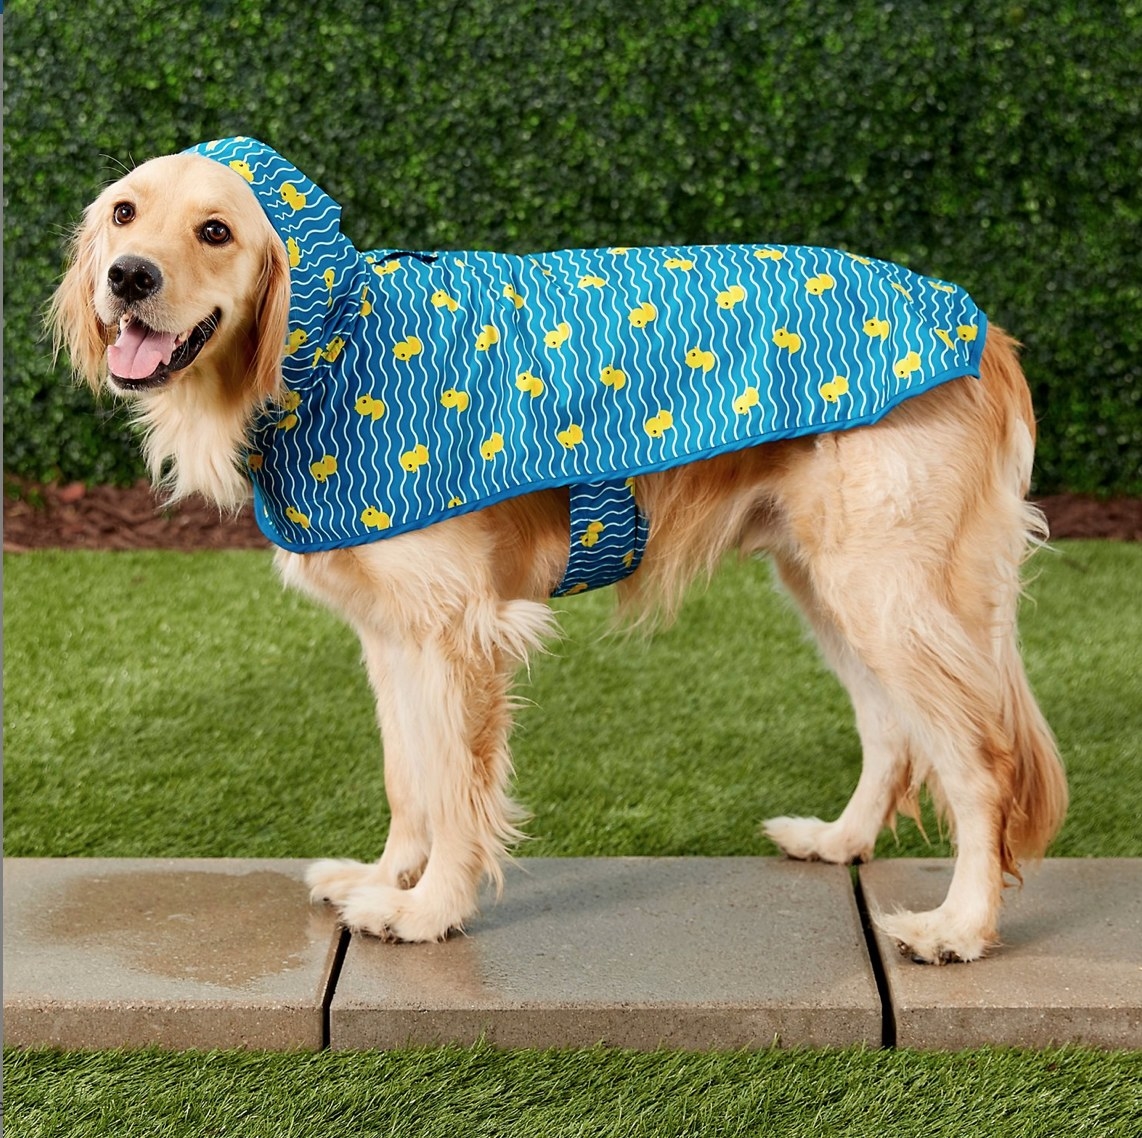 A yellow dog wearing a blue and yellow coat with hood